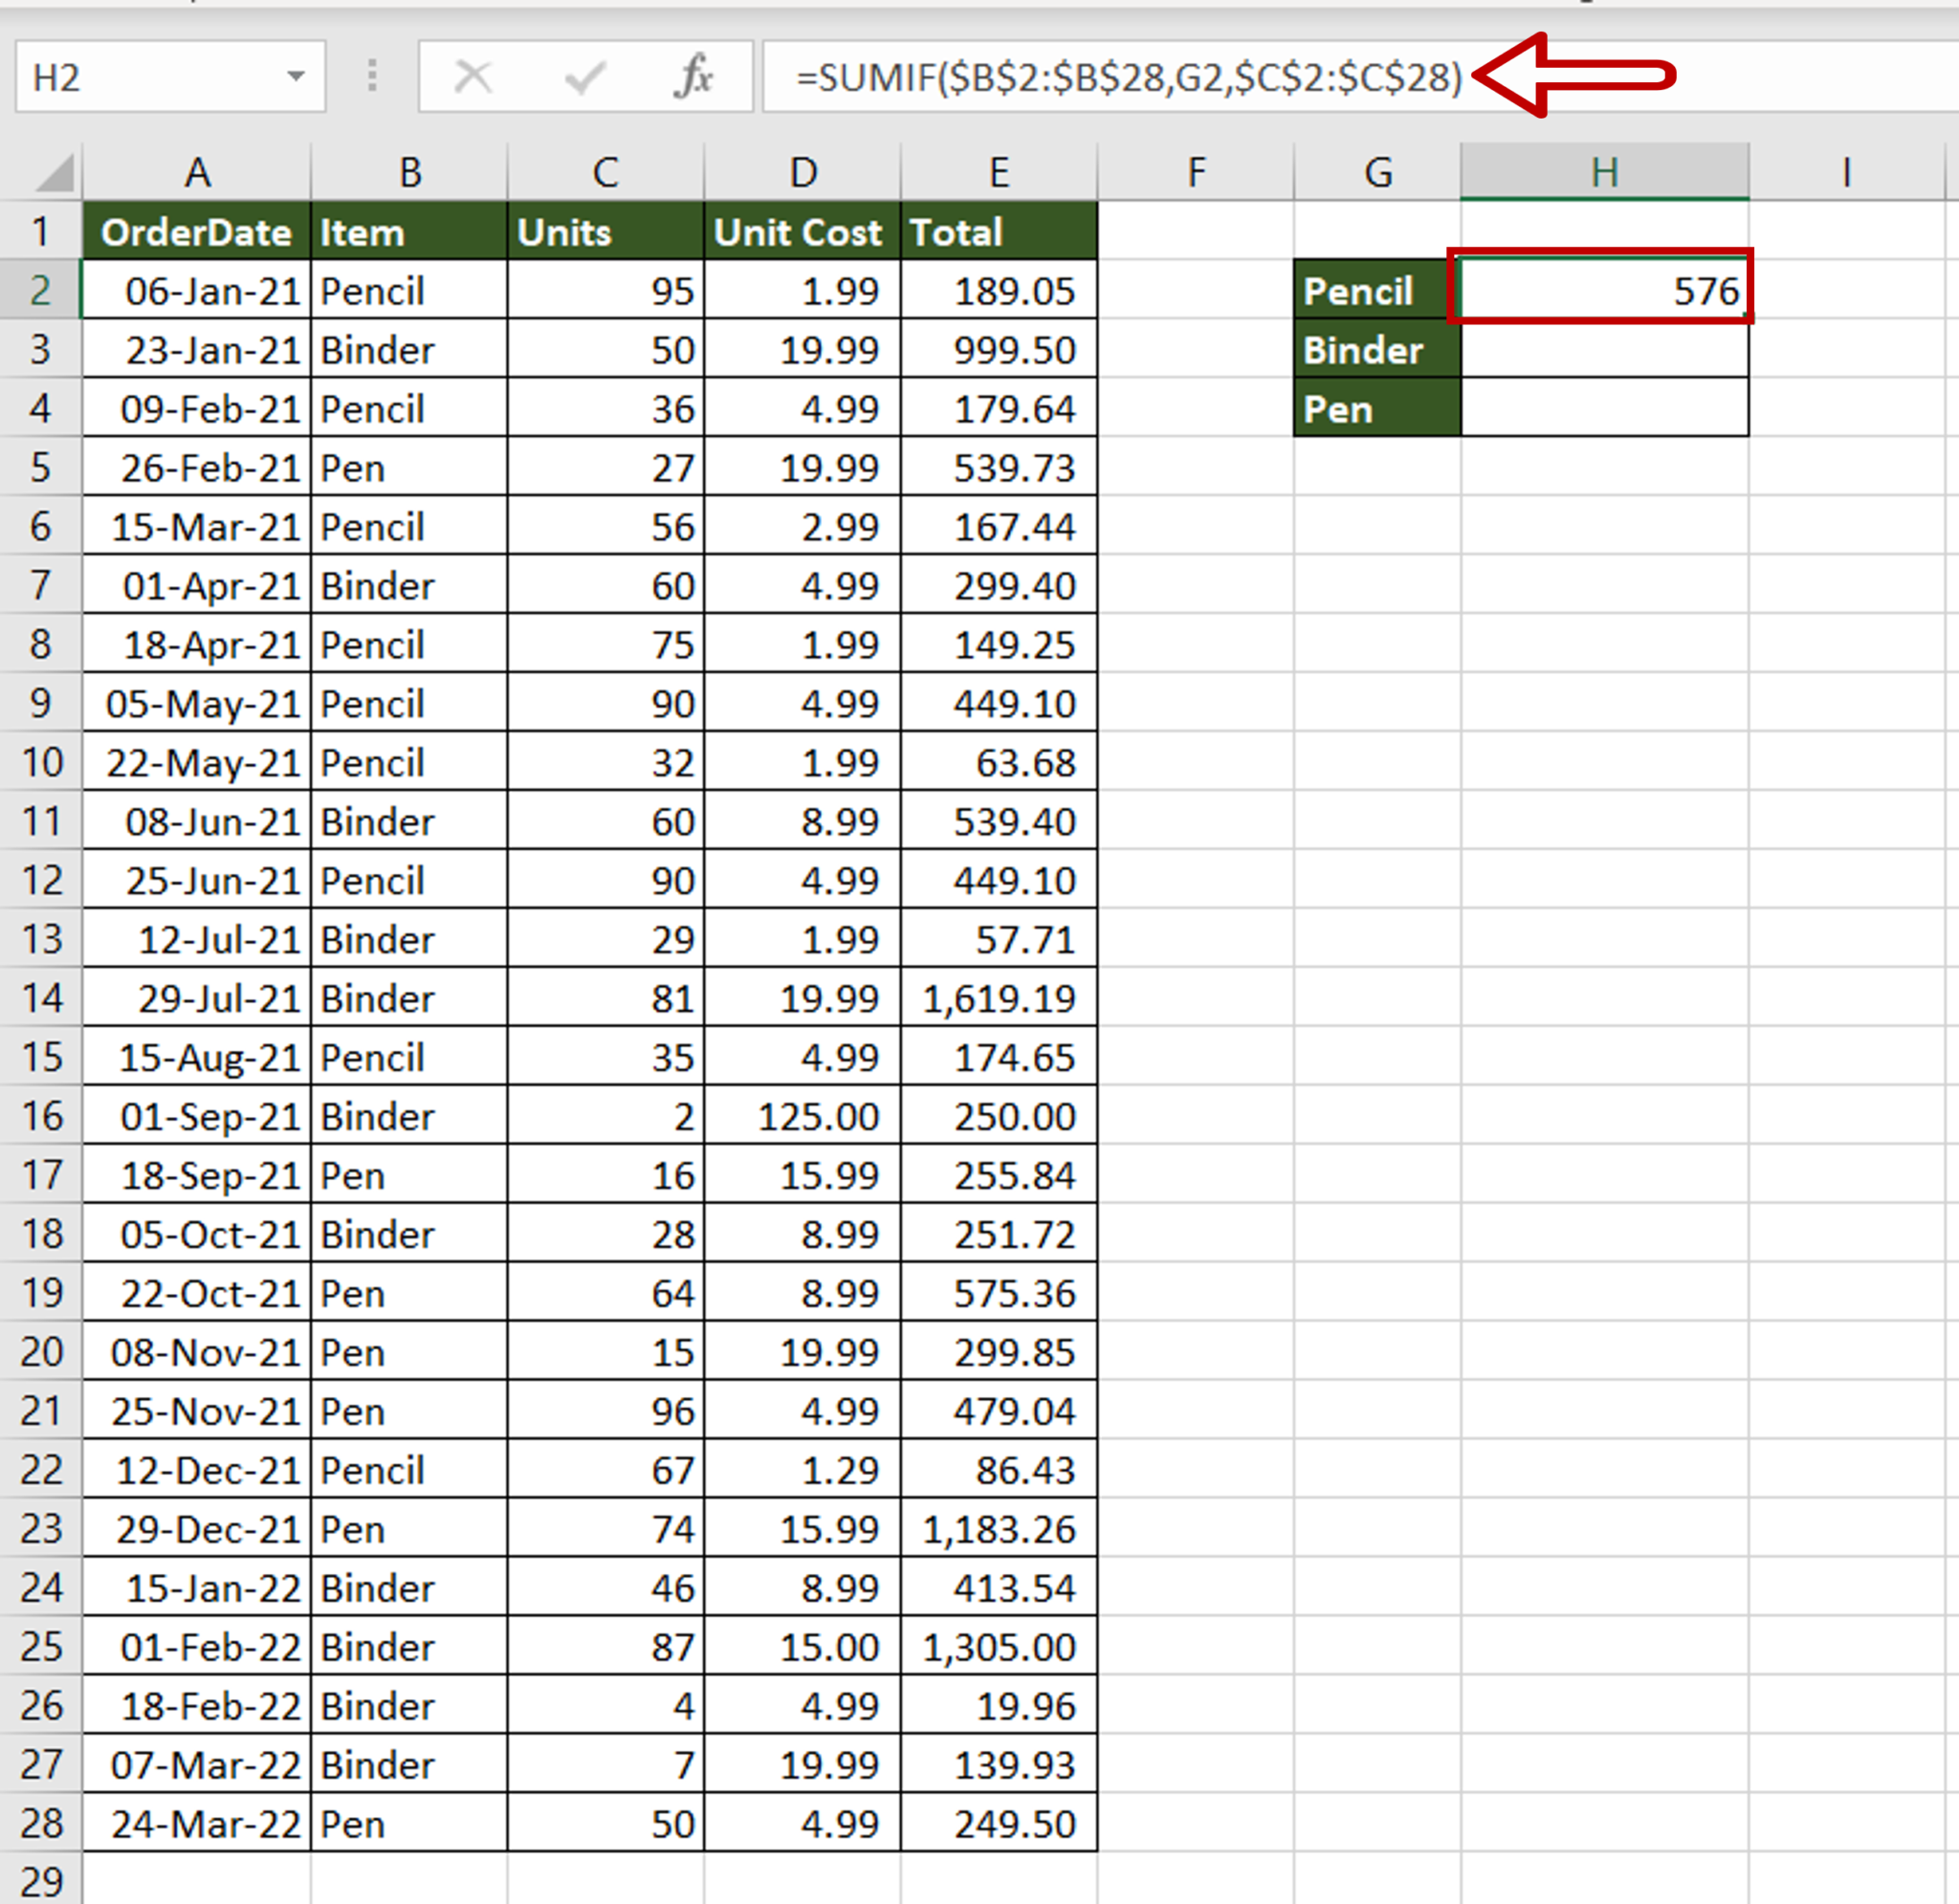 how-to-sum-values-based-on-criteria-in-another-column-in-excel-spreadcheaters